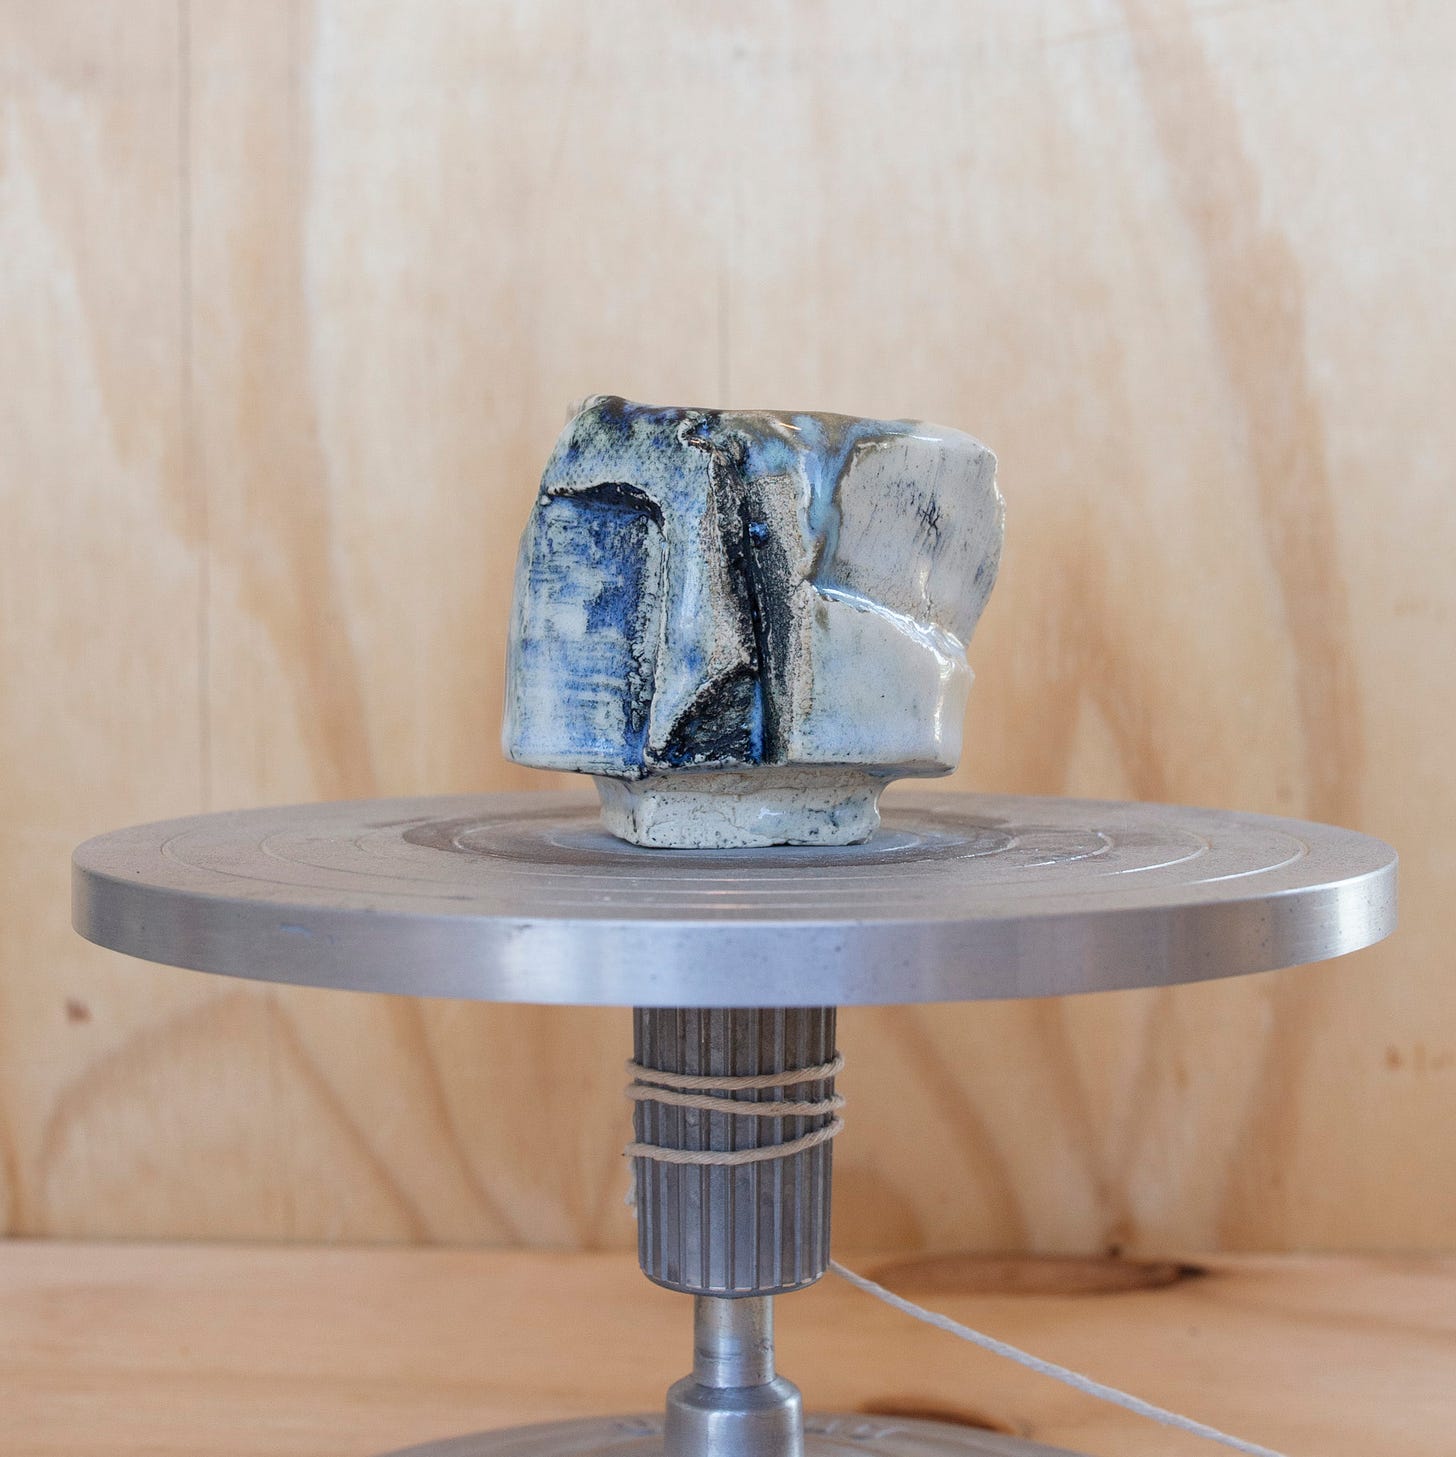 A carved clay cup in front of plywood and sitting on an aluminum stand.